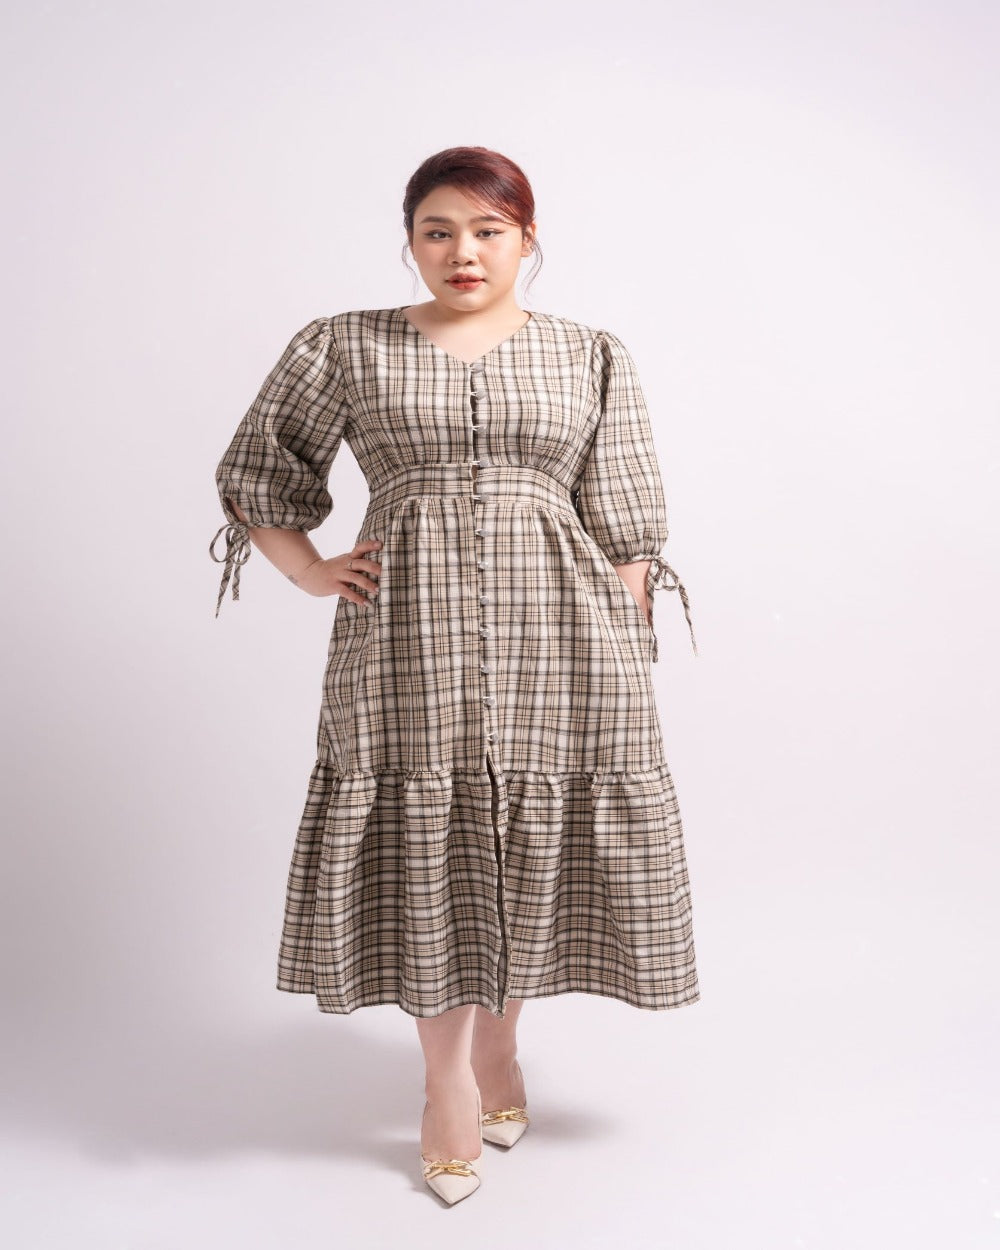 Women's gingham dress with pockets, Olive, 2/3 sleeves Perth, Au